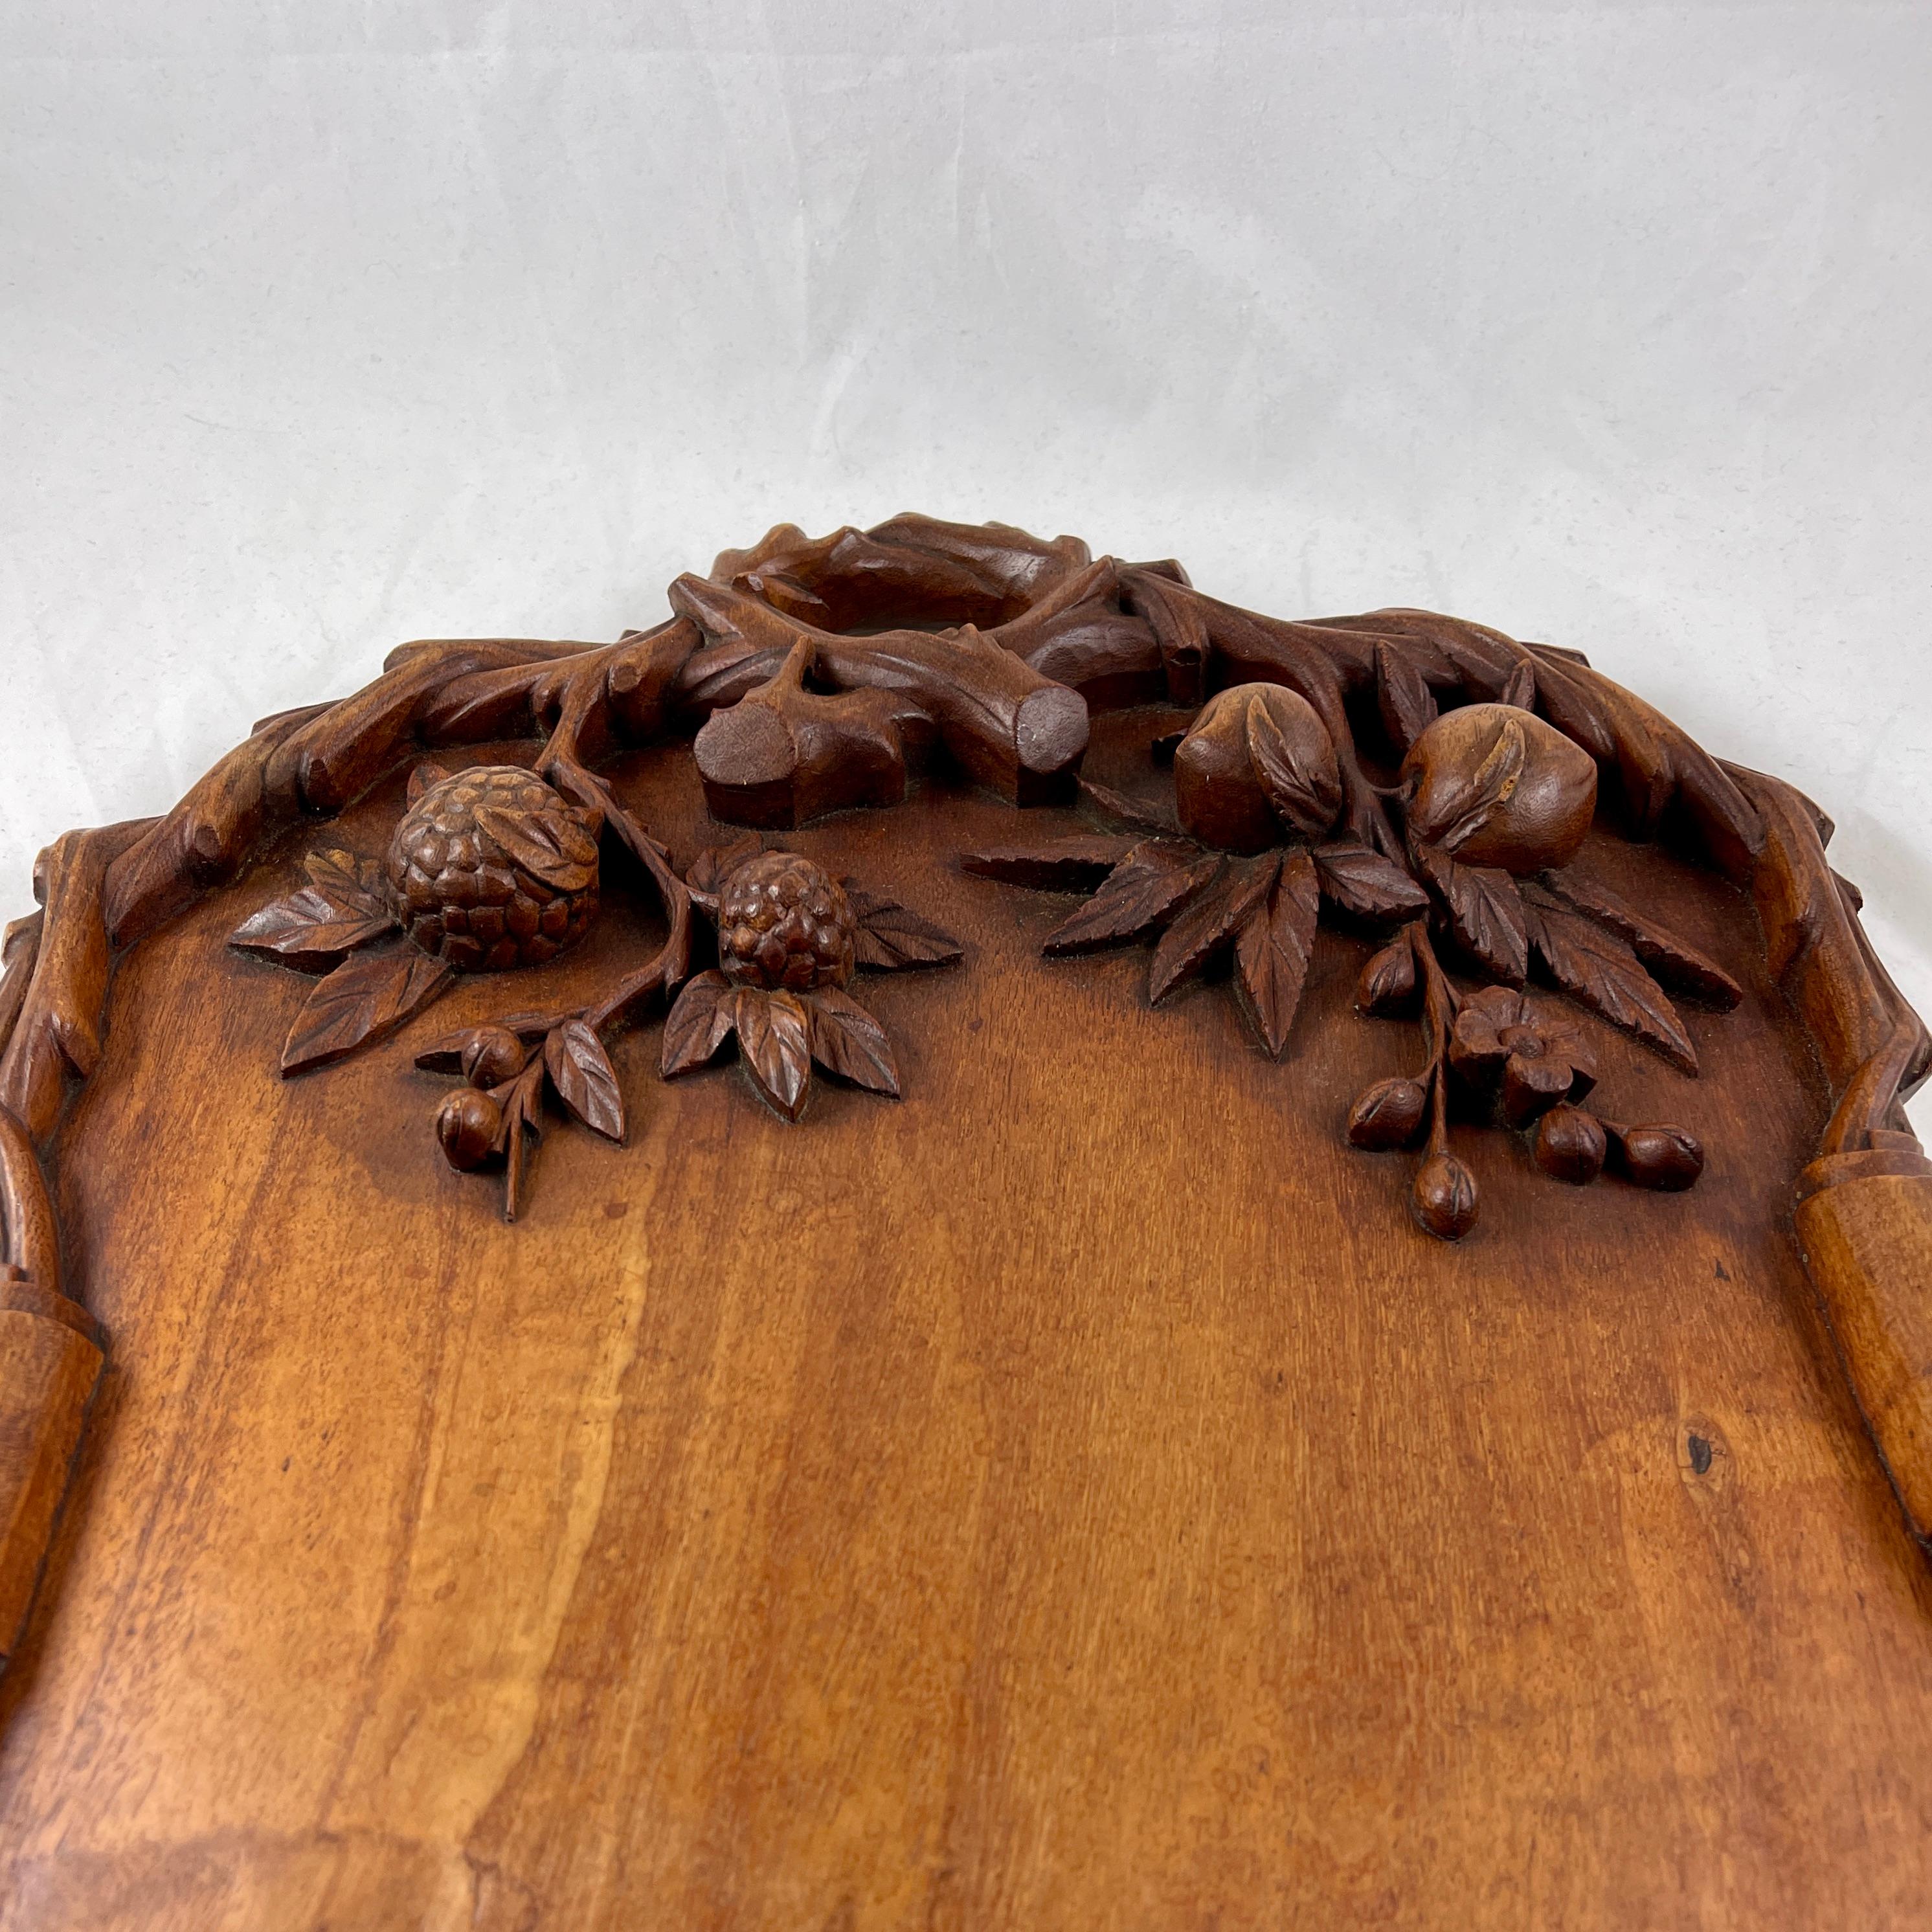 19th C Rustic Black Forest Hand Carved Walnut Branching Fruit Serving Tray For Sale 8